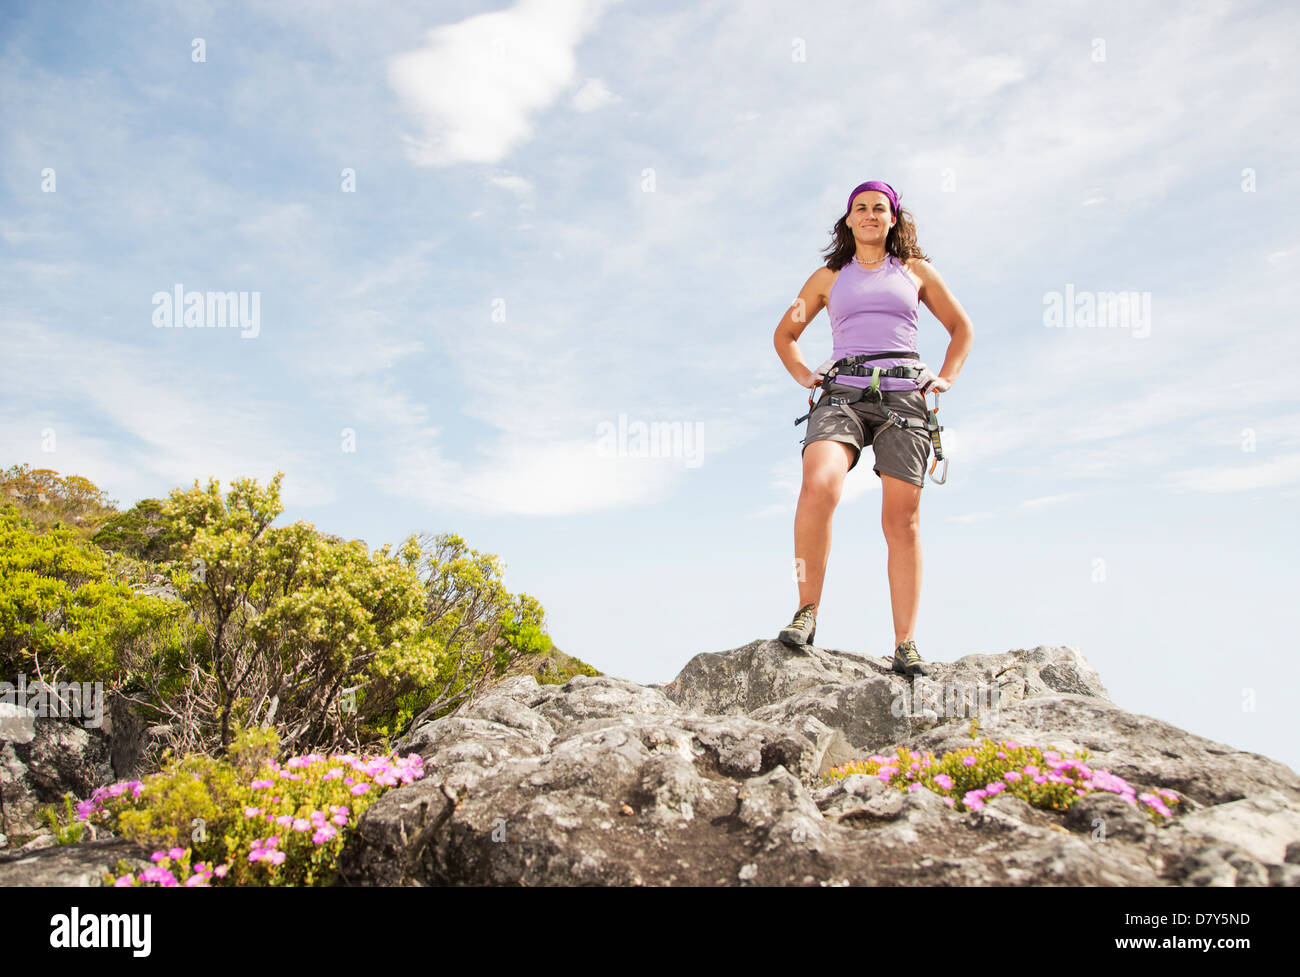 Climber standing on rocky hilltop Stock Photo